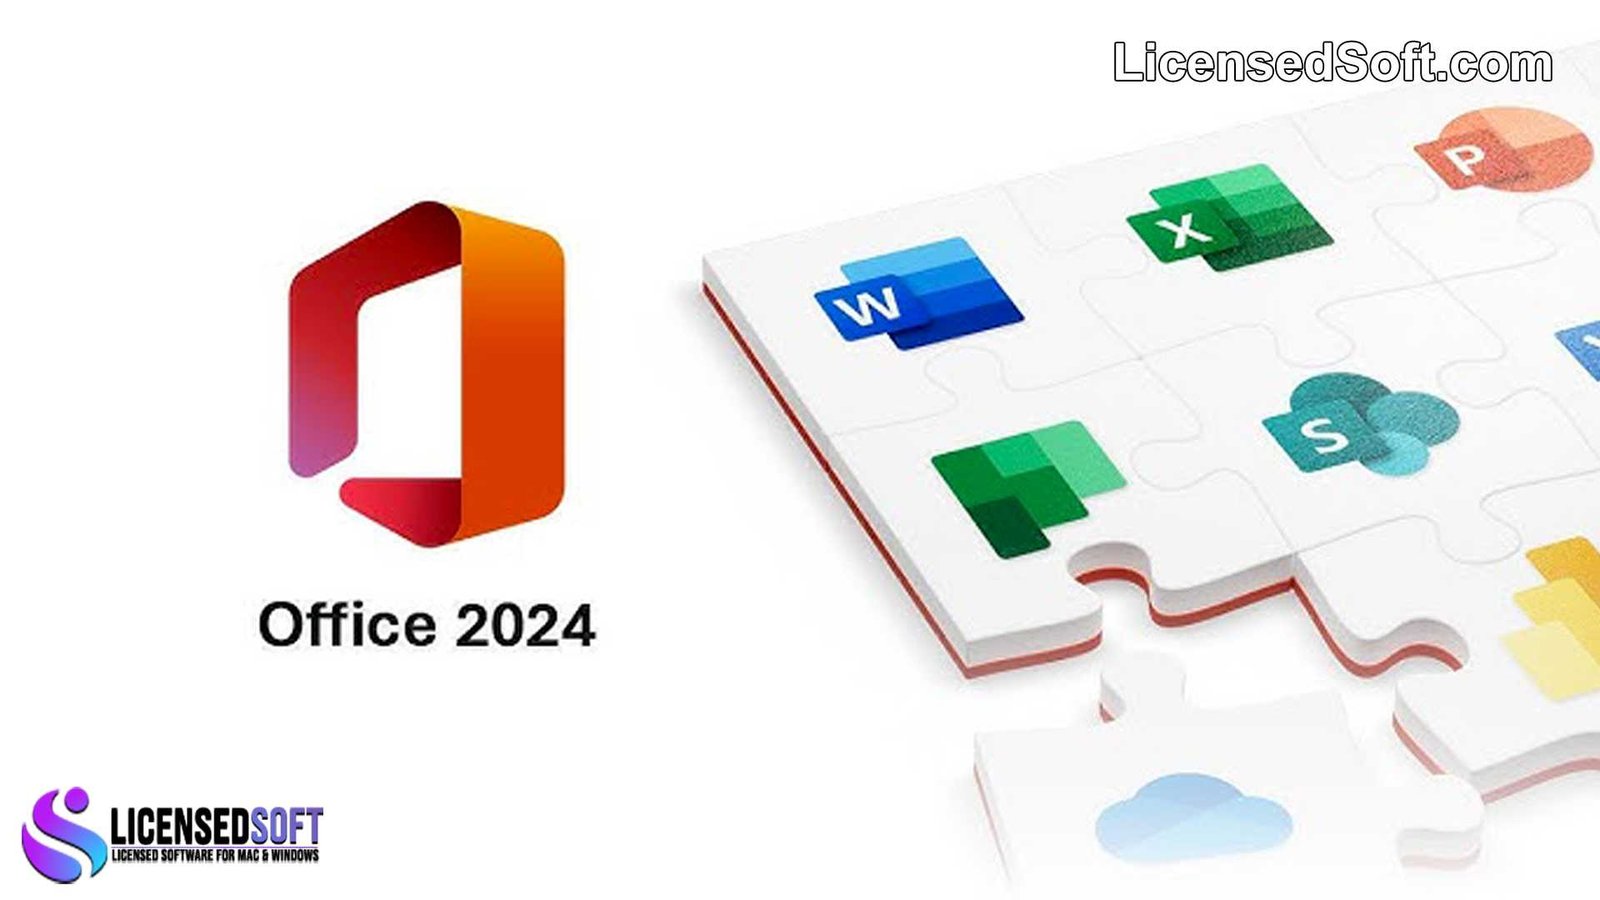 Microsoft Office Lifetime License 2024 Professional Plus By LicensedSoft